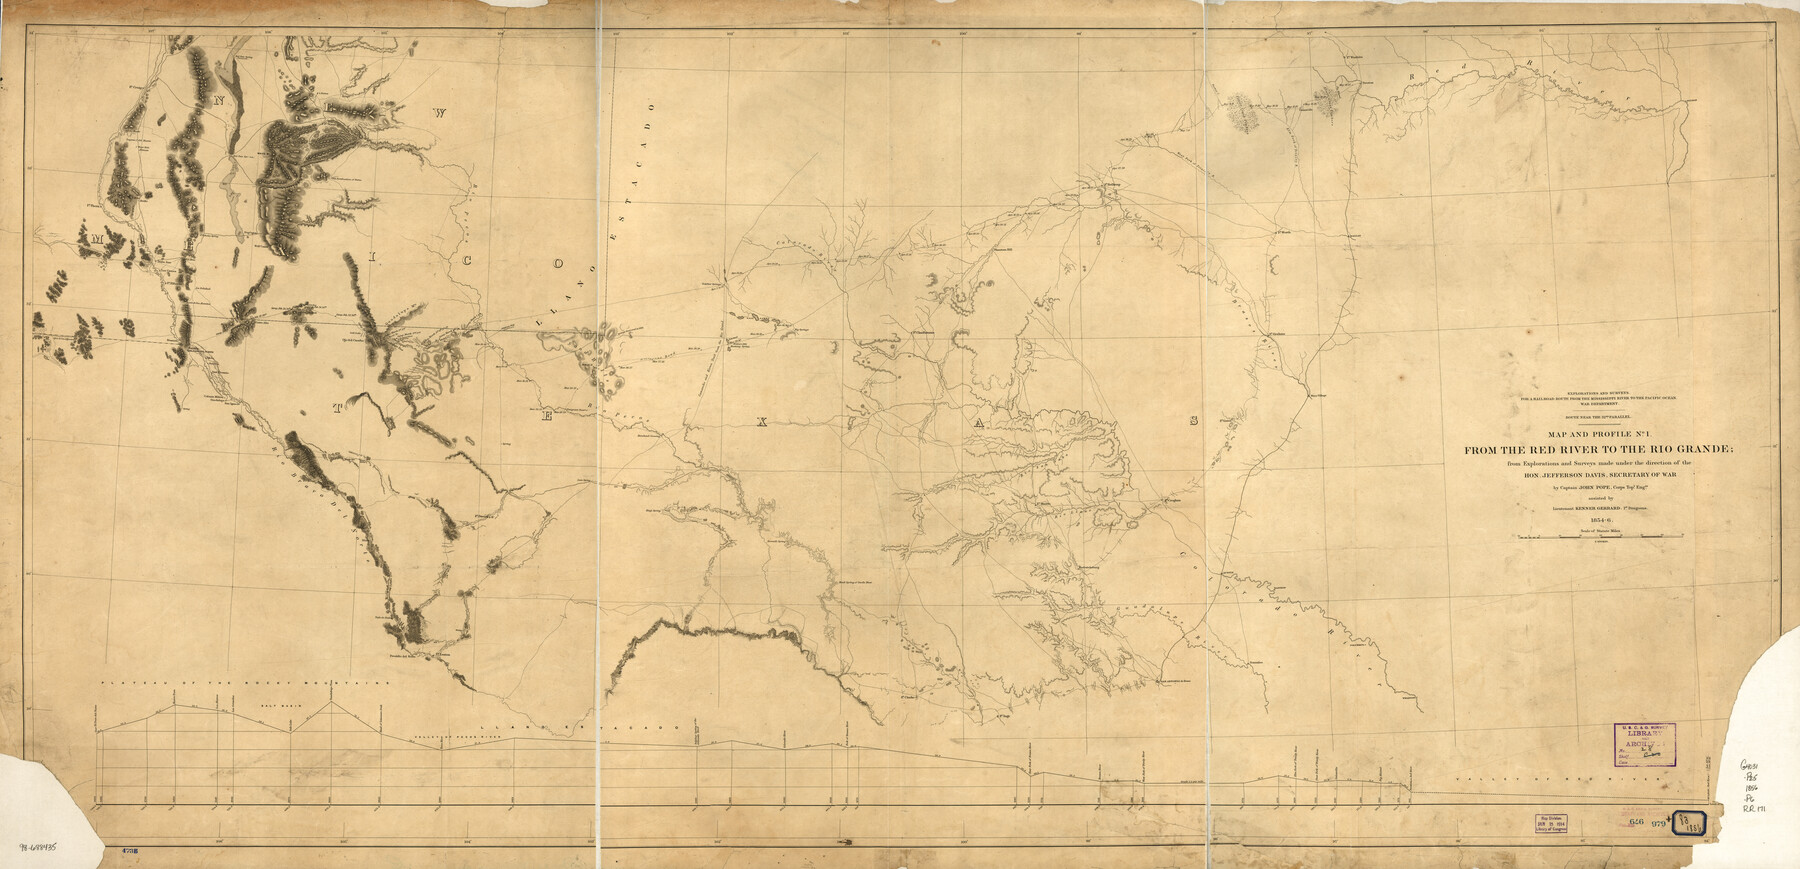 93581, From the Red River to the Rio Grande from explorations and surveys made under the direction of the Hon. Jefferson Davis, Secretary of War by Captain John Pope, Corps Topl. Engrs. assisted by Lieutenant Kenner Gerrard, 1st Dragoons, 1854-6, Library of Congress